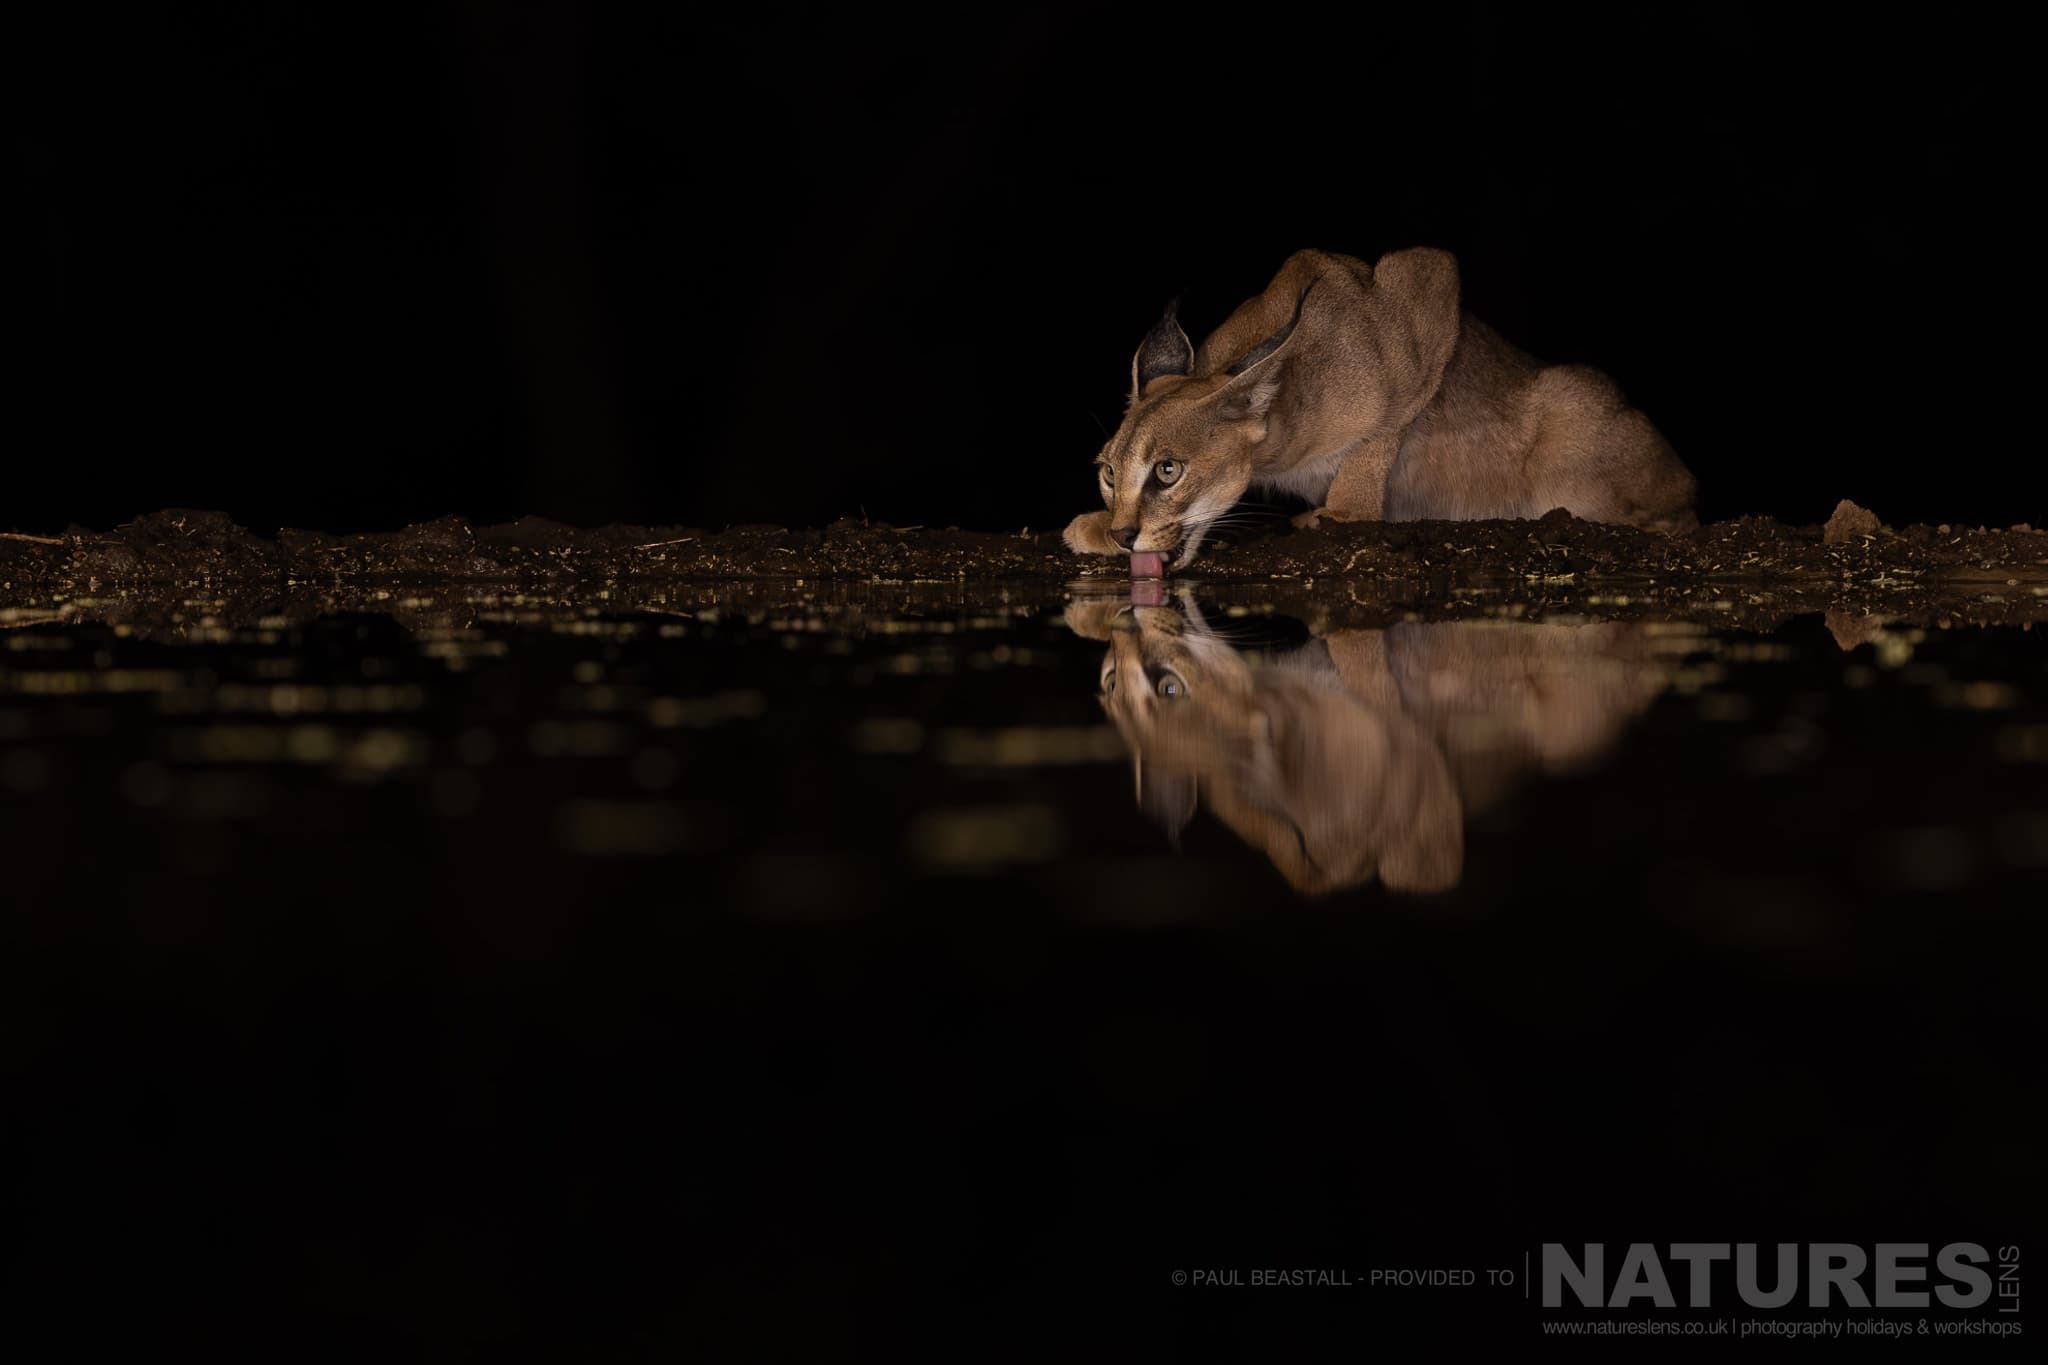 A Caracal Drinking From The Waterhole At Night Photographed By Paul Beastall During A Photography Holiday At Lentorre Lodge With Natureslens